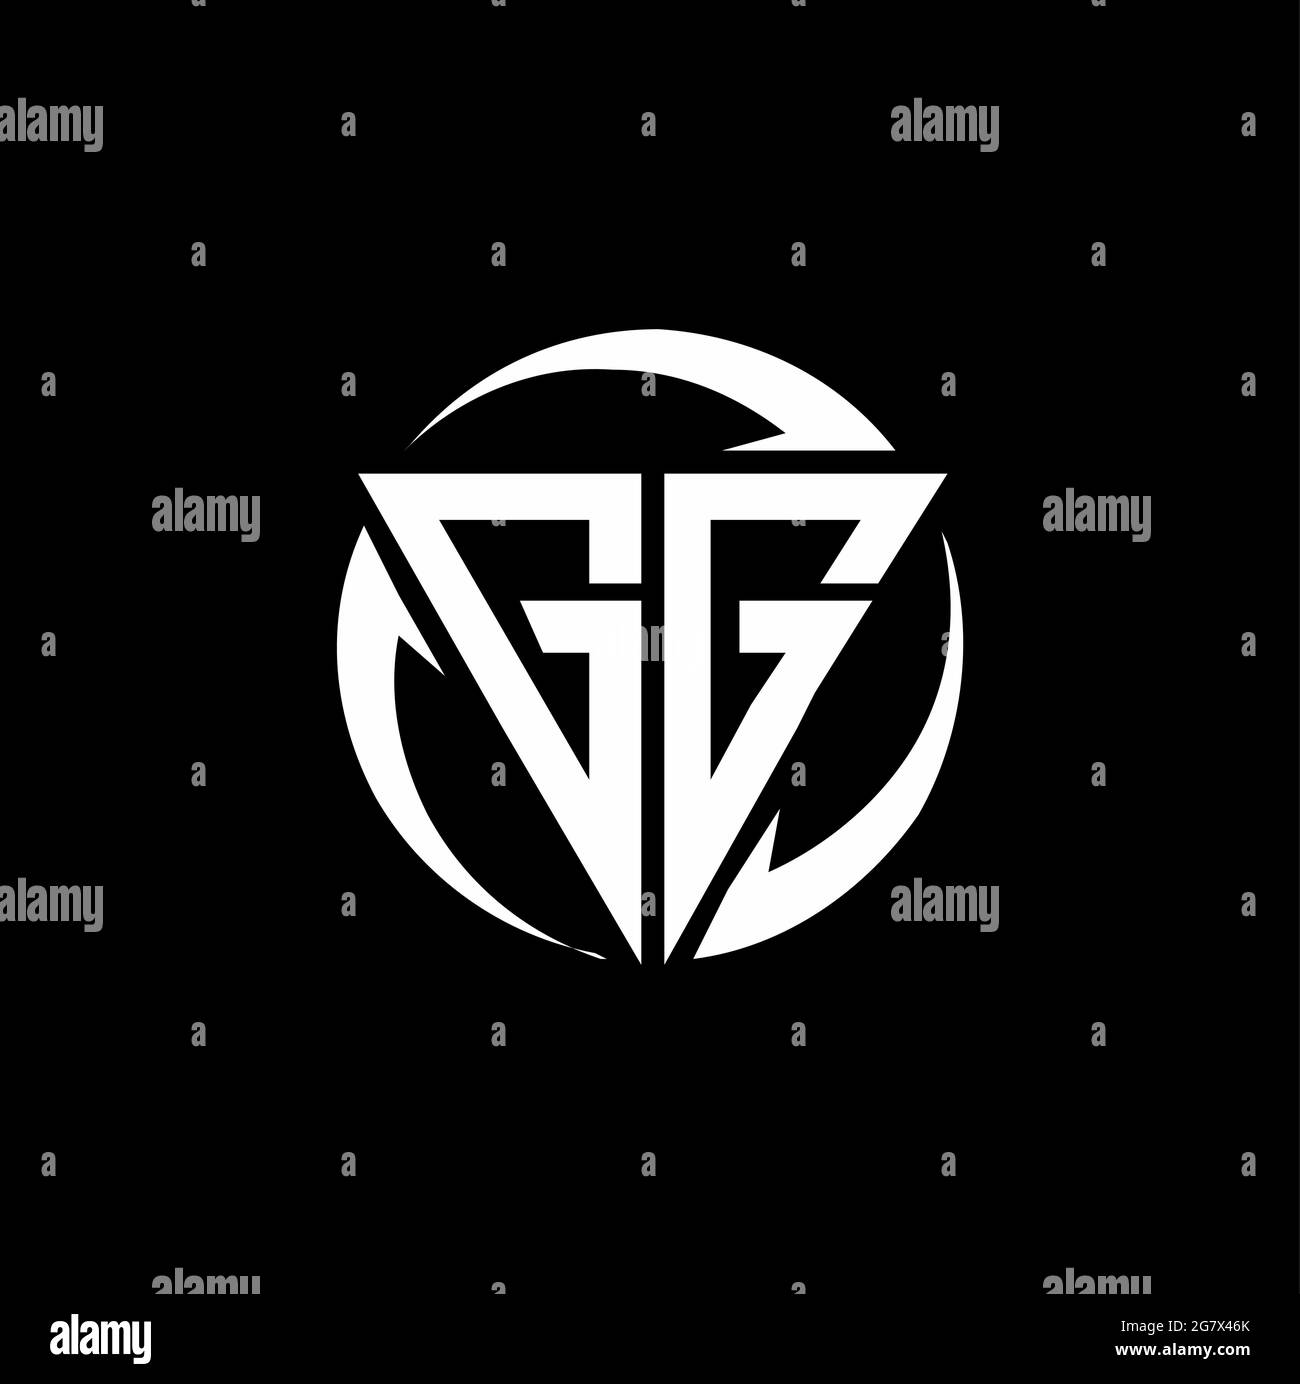 Gg Logo High Resolution Stock Photography and Images - Alamy